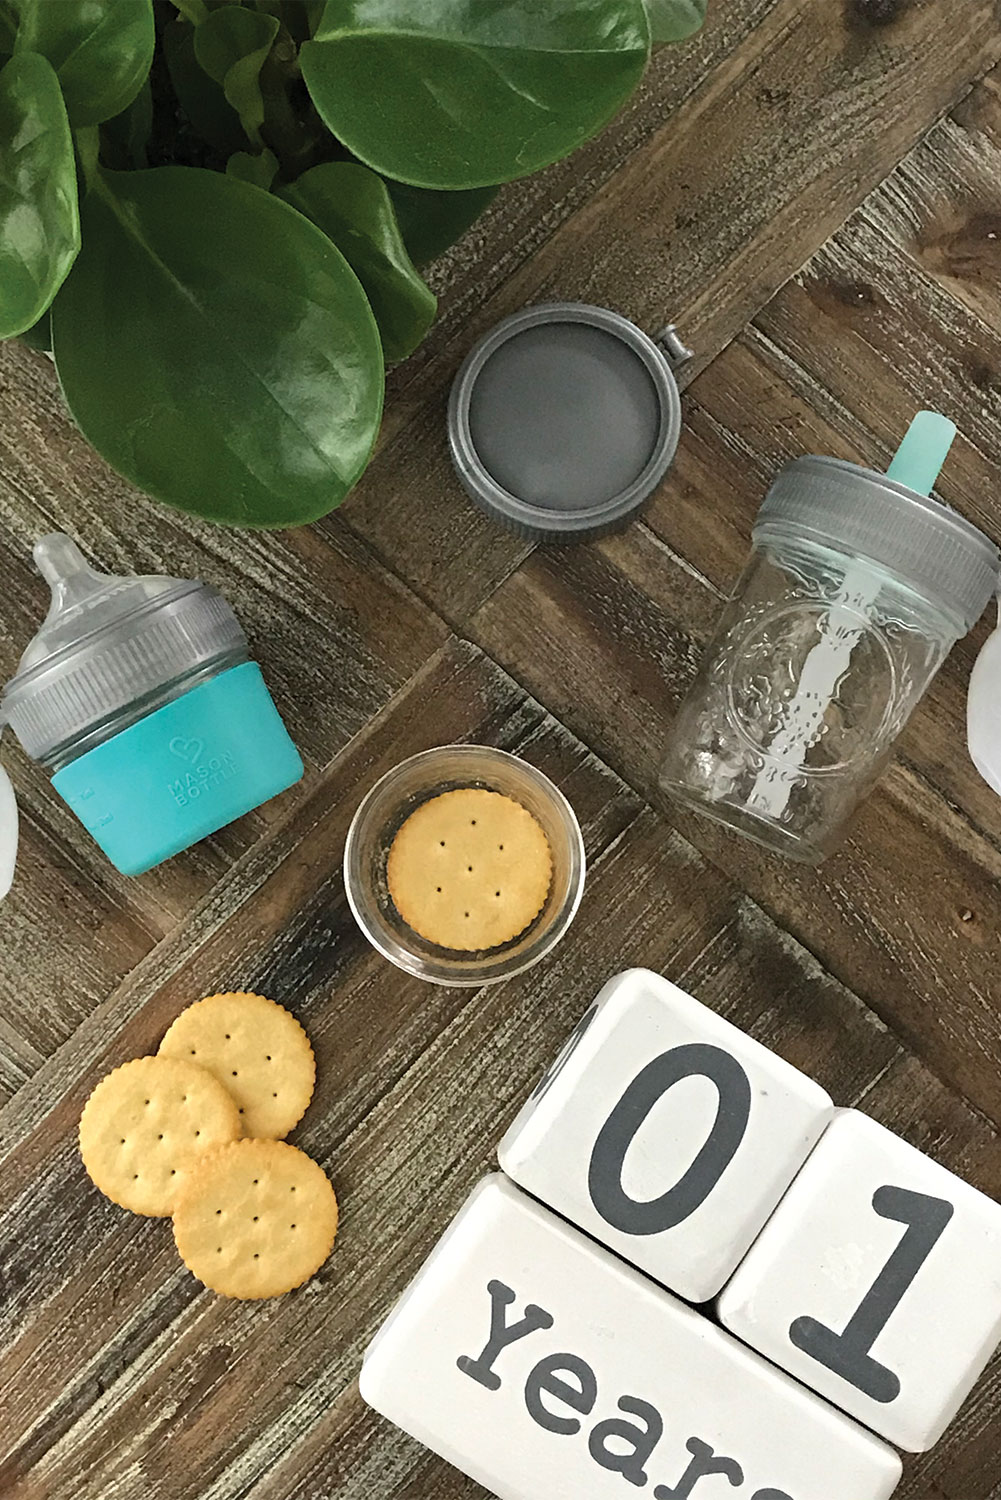 THE BEST HEALTHY BABY BOTTLE AND SIPPY CUP